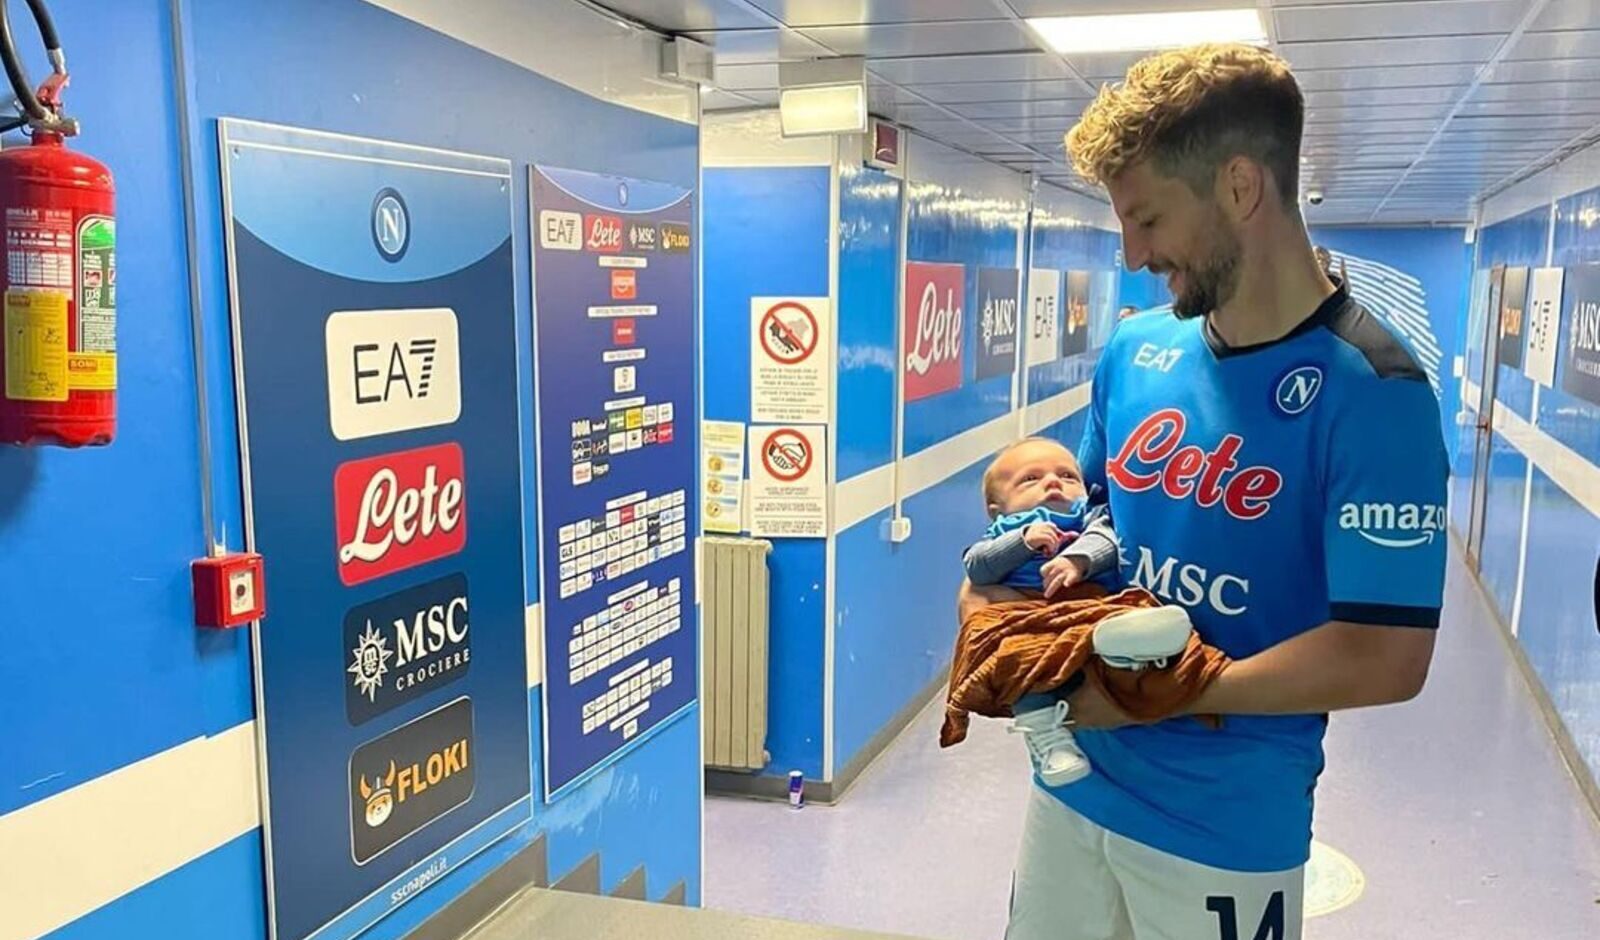 Dries Mertens with his son Ciro in his arms visiting Napoli